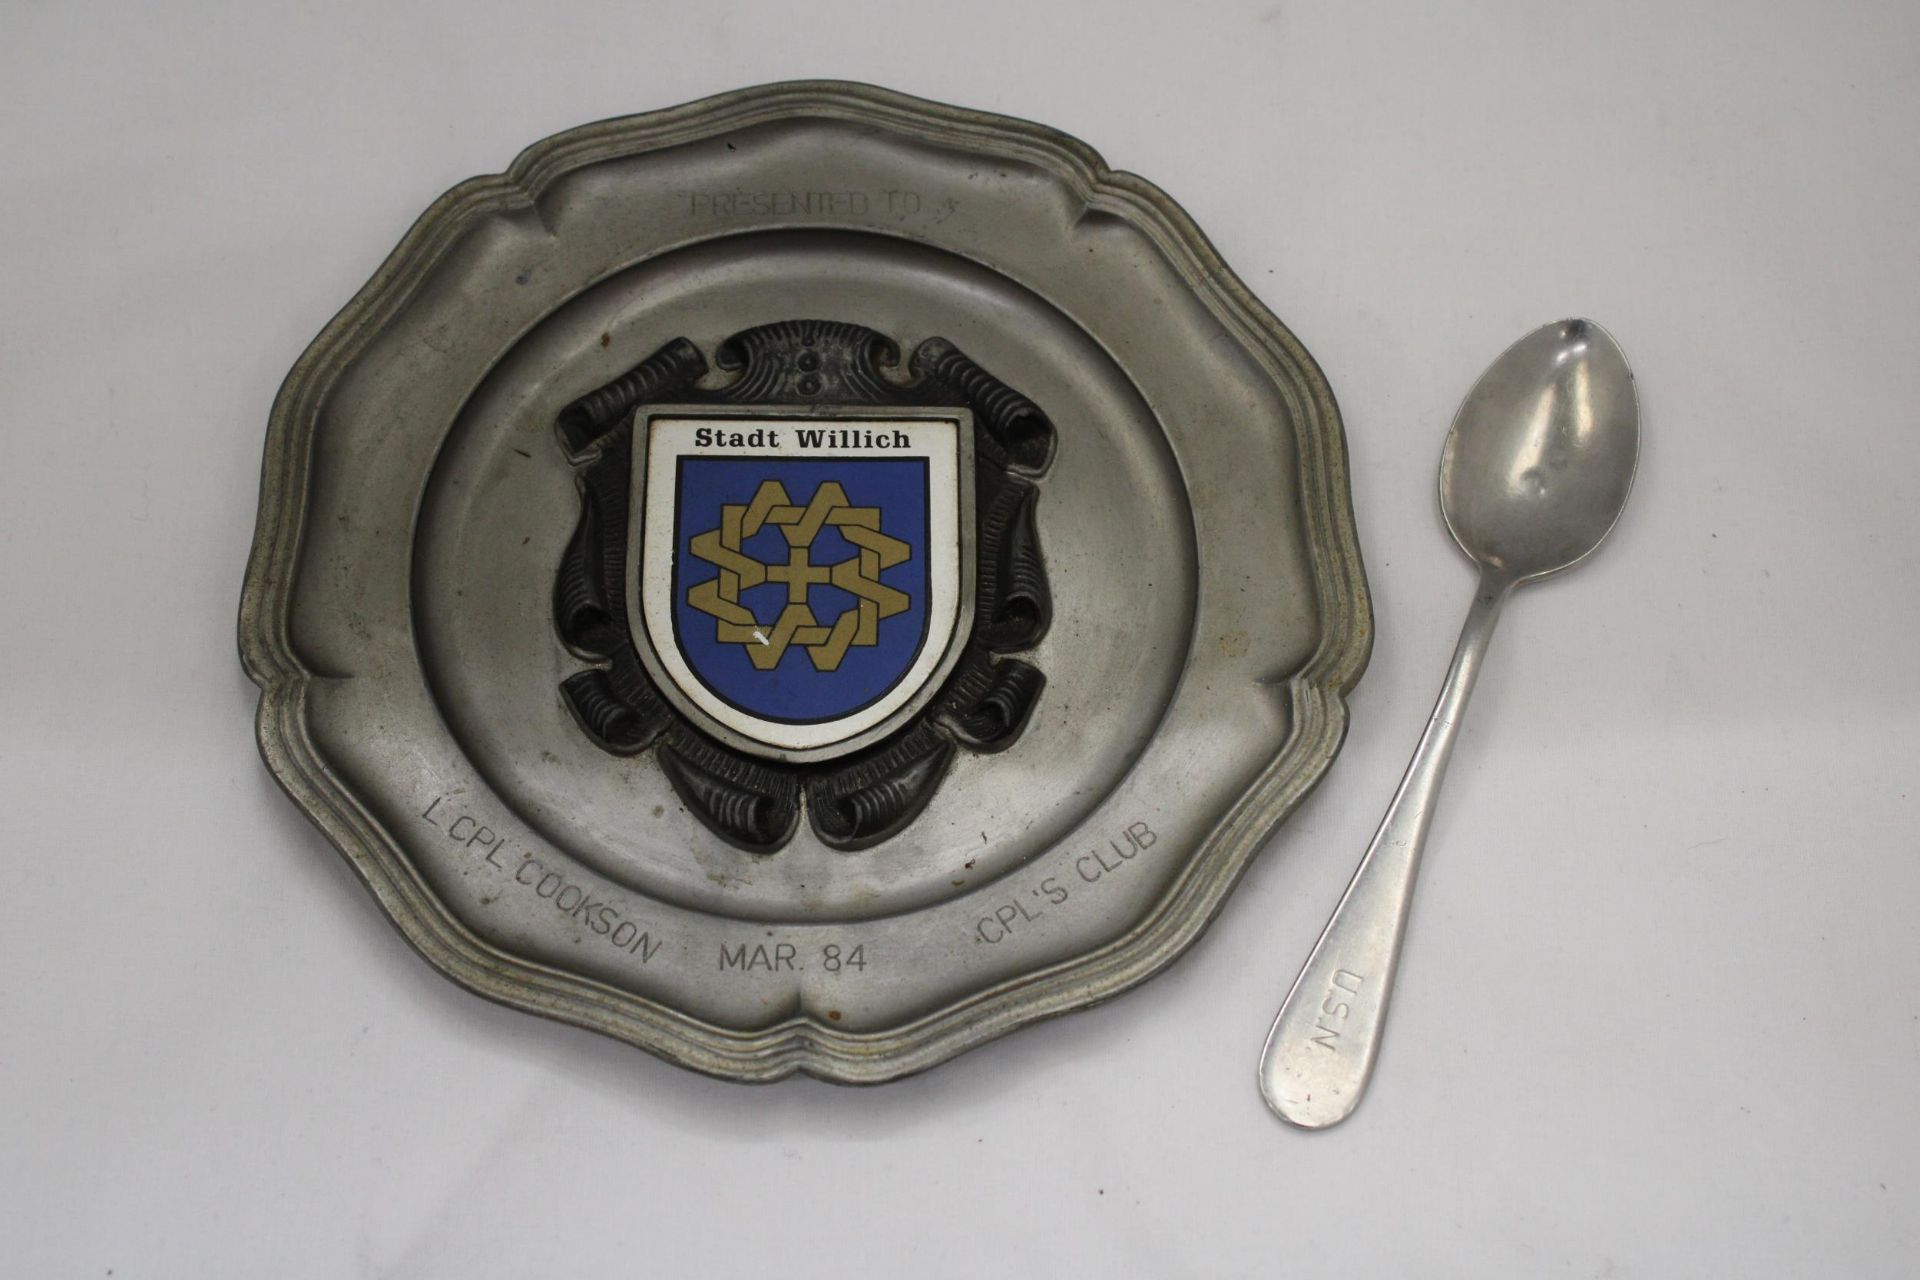 A VINTAGE PEWTER TRAY AND A UNITED STATES NAVY SPOON